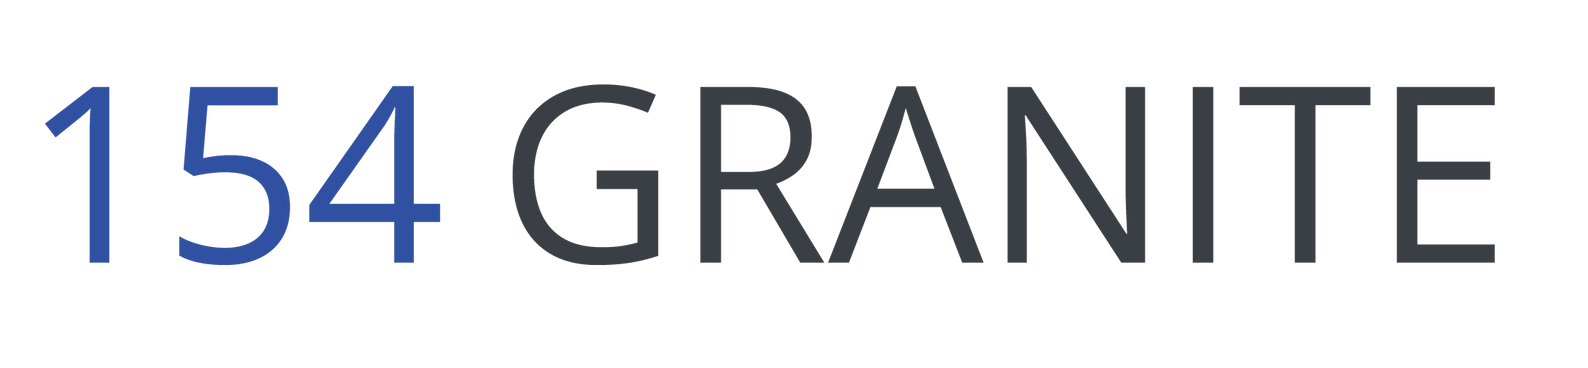 154 Granite  Logo - Click to Go to Home page